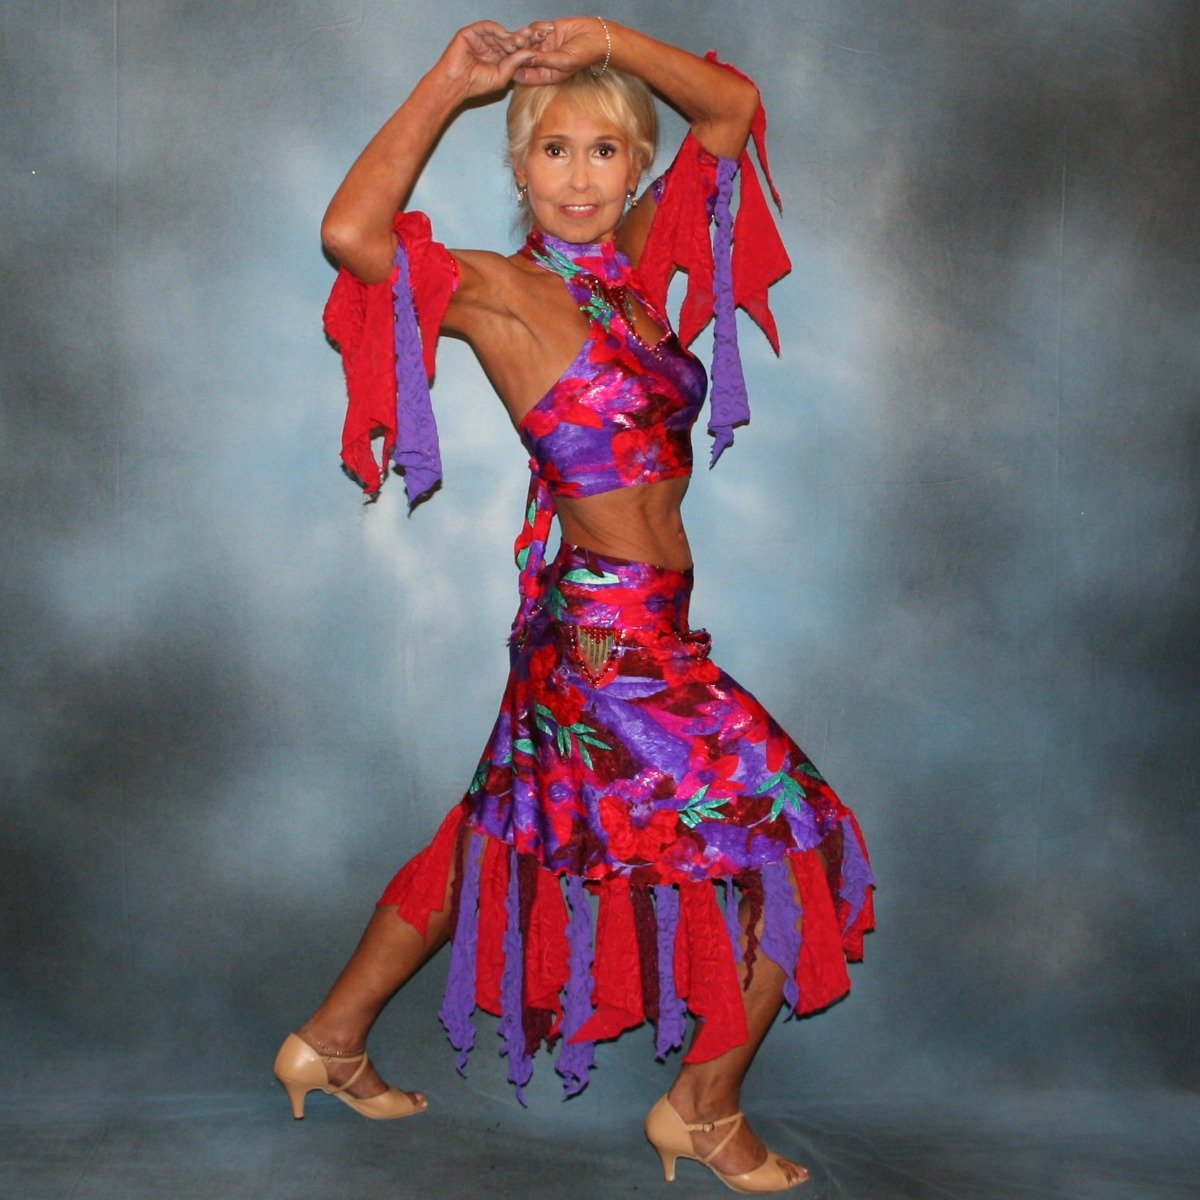 Crystal's Creations Red & purple tropical print 2 piece Latin/rhythm dress was created in tropical print lycra in deep reds,purples & a touch of green, along with accents of deep red textured chiffon scarf cut flounces & purple stretch lace petal cut flounces on skirt and arm bands,